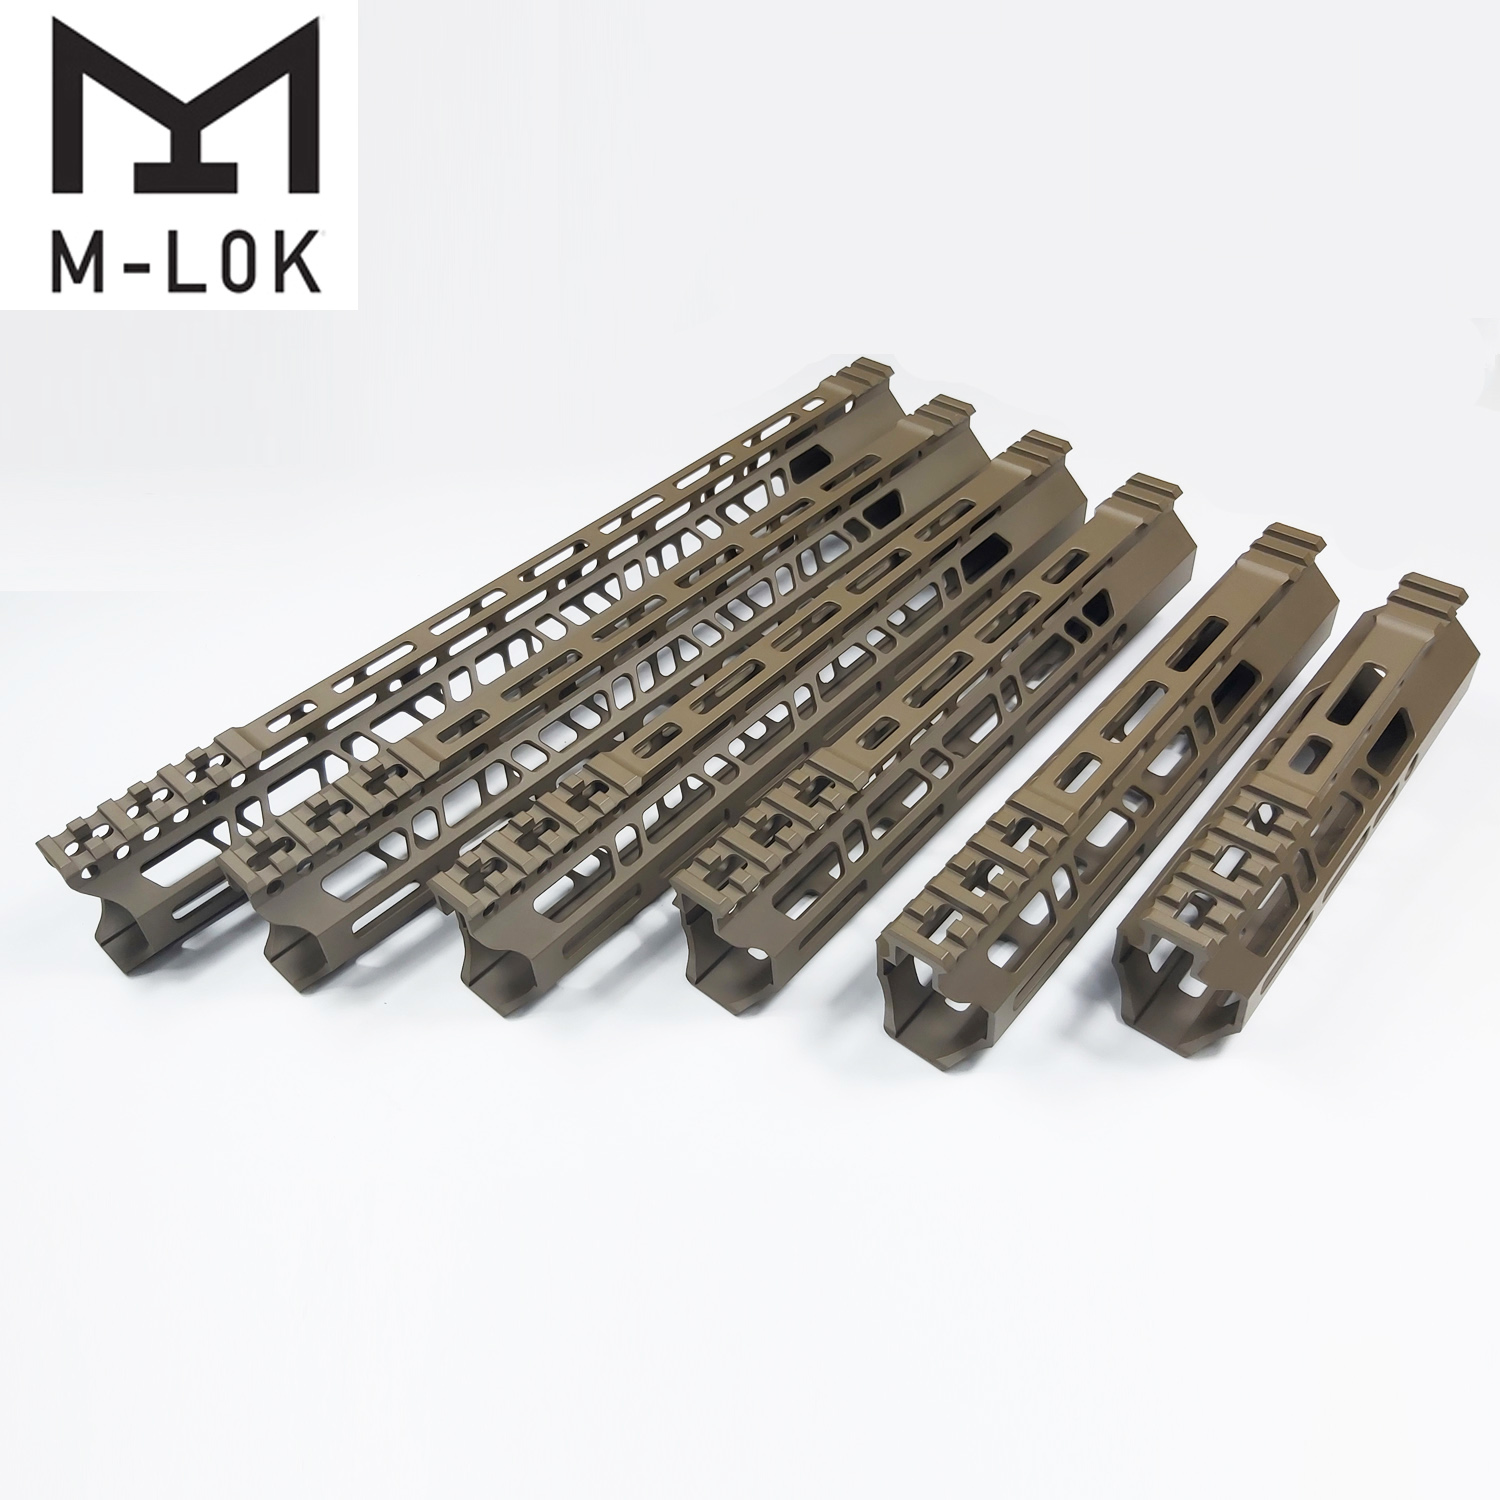 

7/9/10/12/13.5/15 Inch Lightweight Clamp Mount Type M-LOK Handguards Edge CNC Chamfering For .223/5.56 Flat Dark Earth Color